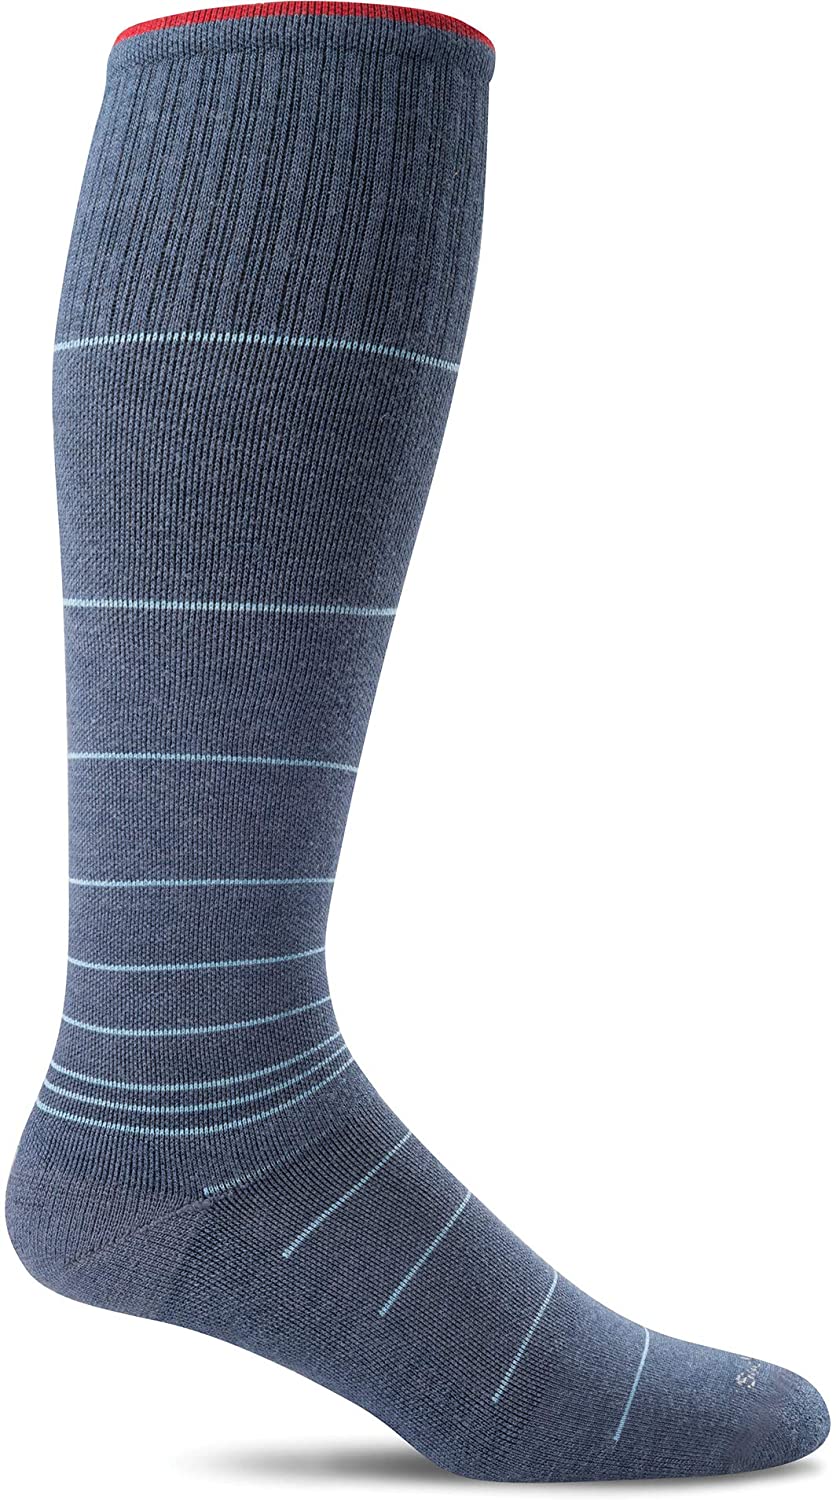 Sockwell Men's Circulator Moderate Graduated Compression Sock in Denim from the side